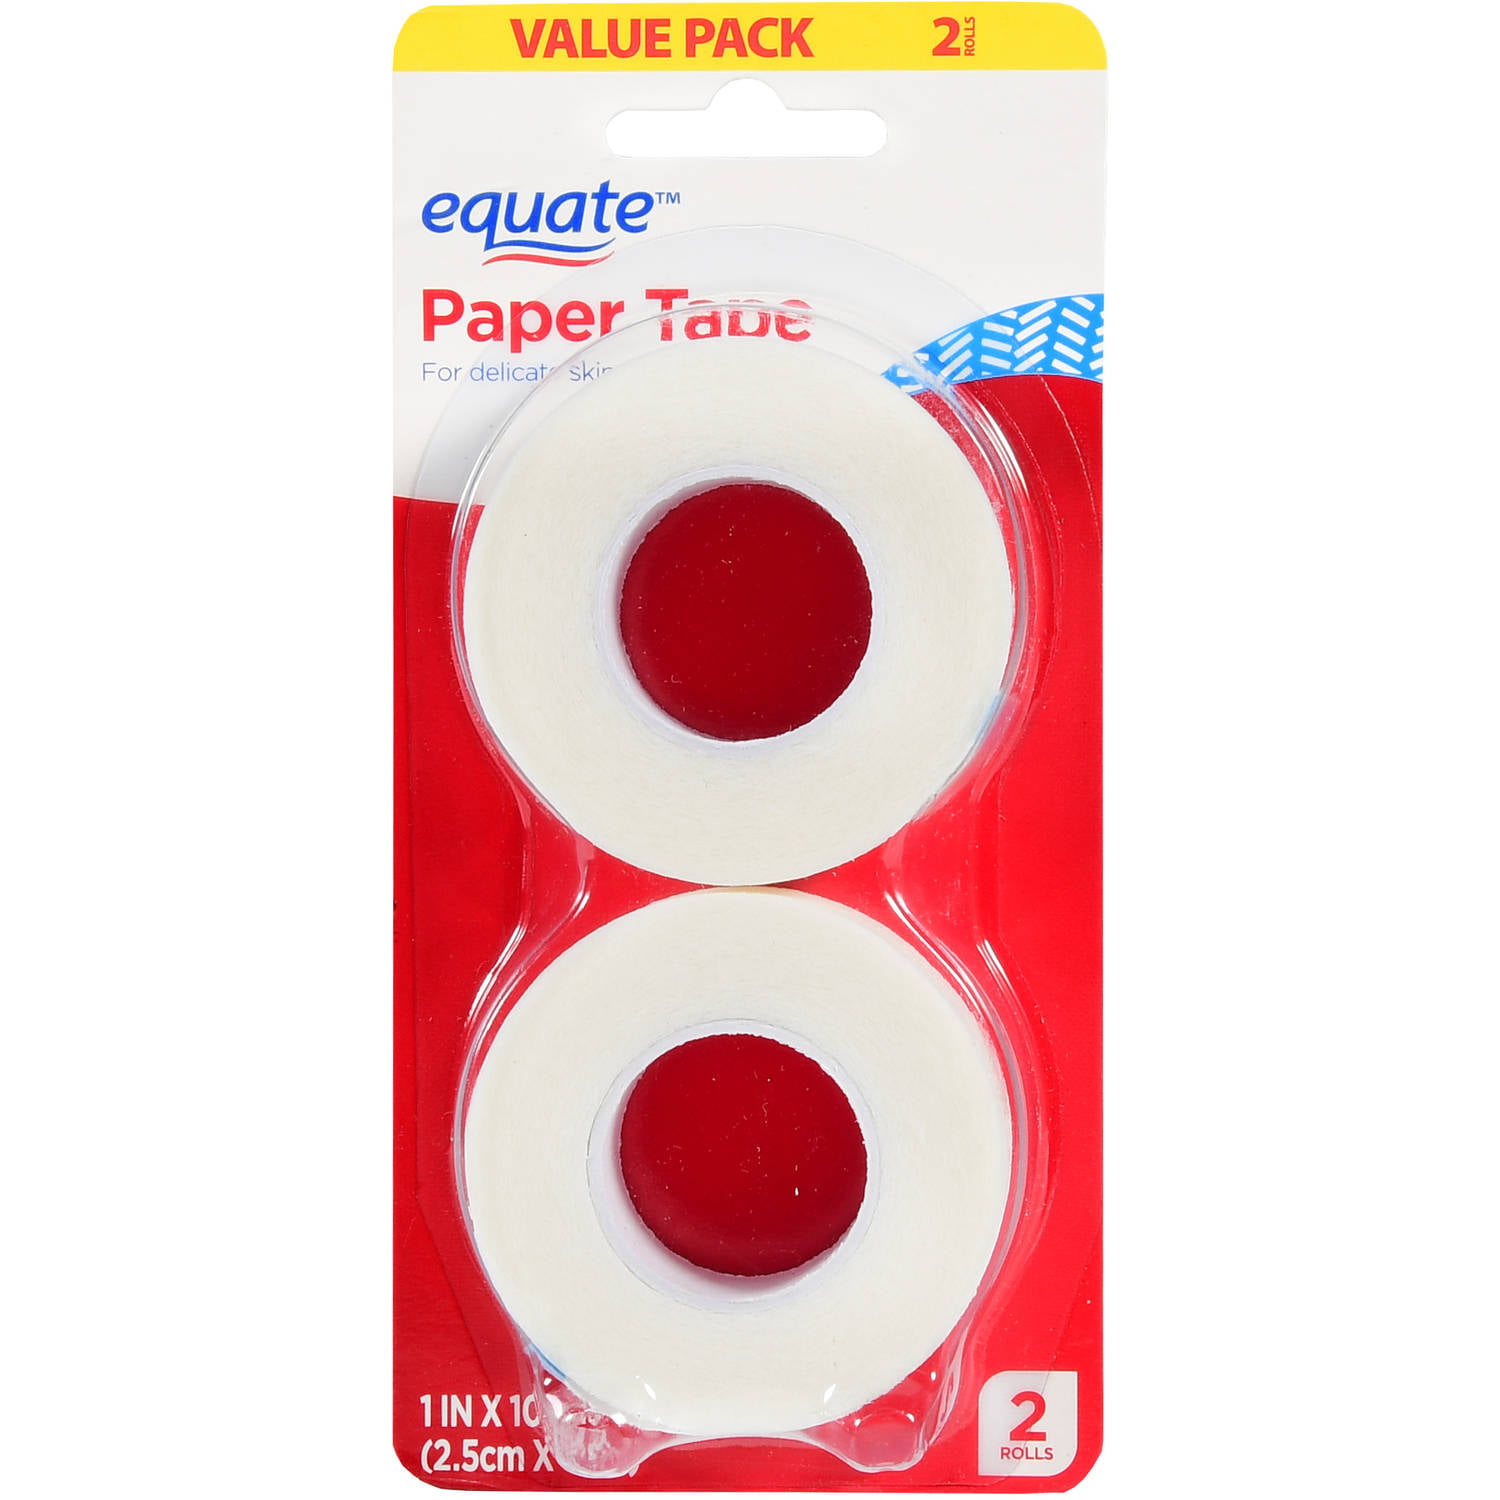 Equate Paper Tape Value Pack, 2 Count